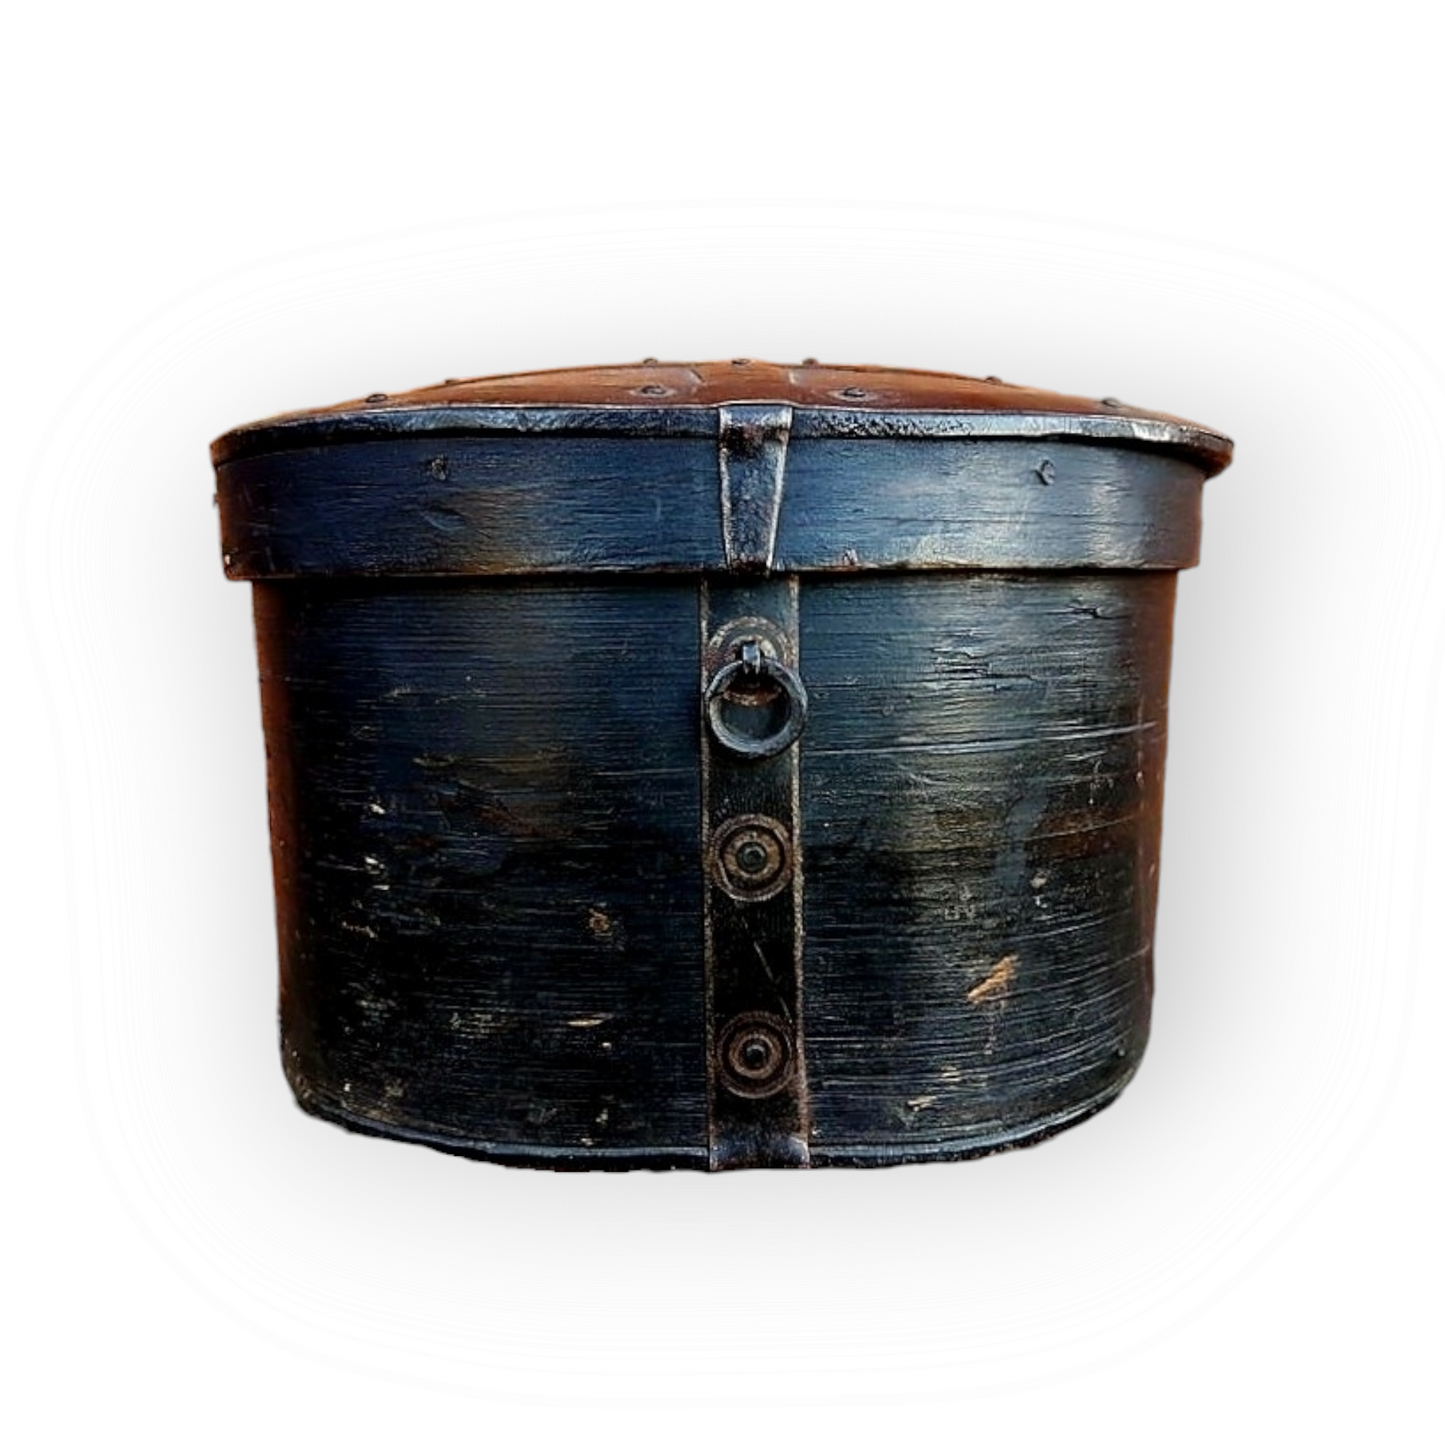 Large 18th Century Scandinavian Bentwood Box with Traces of Original Paint, Circa 1780